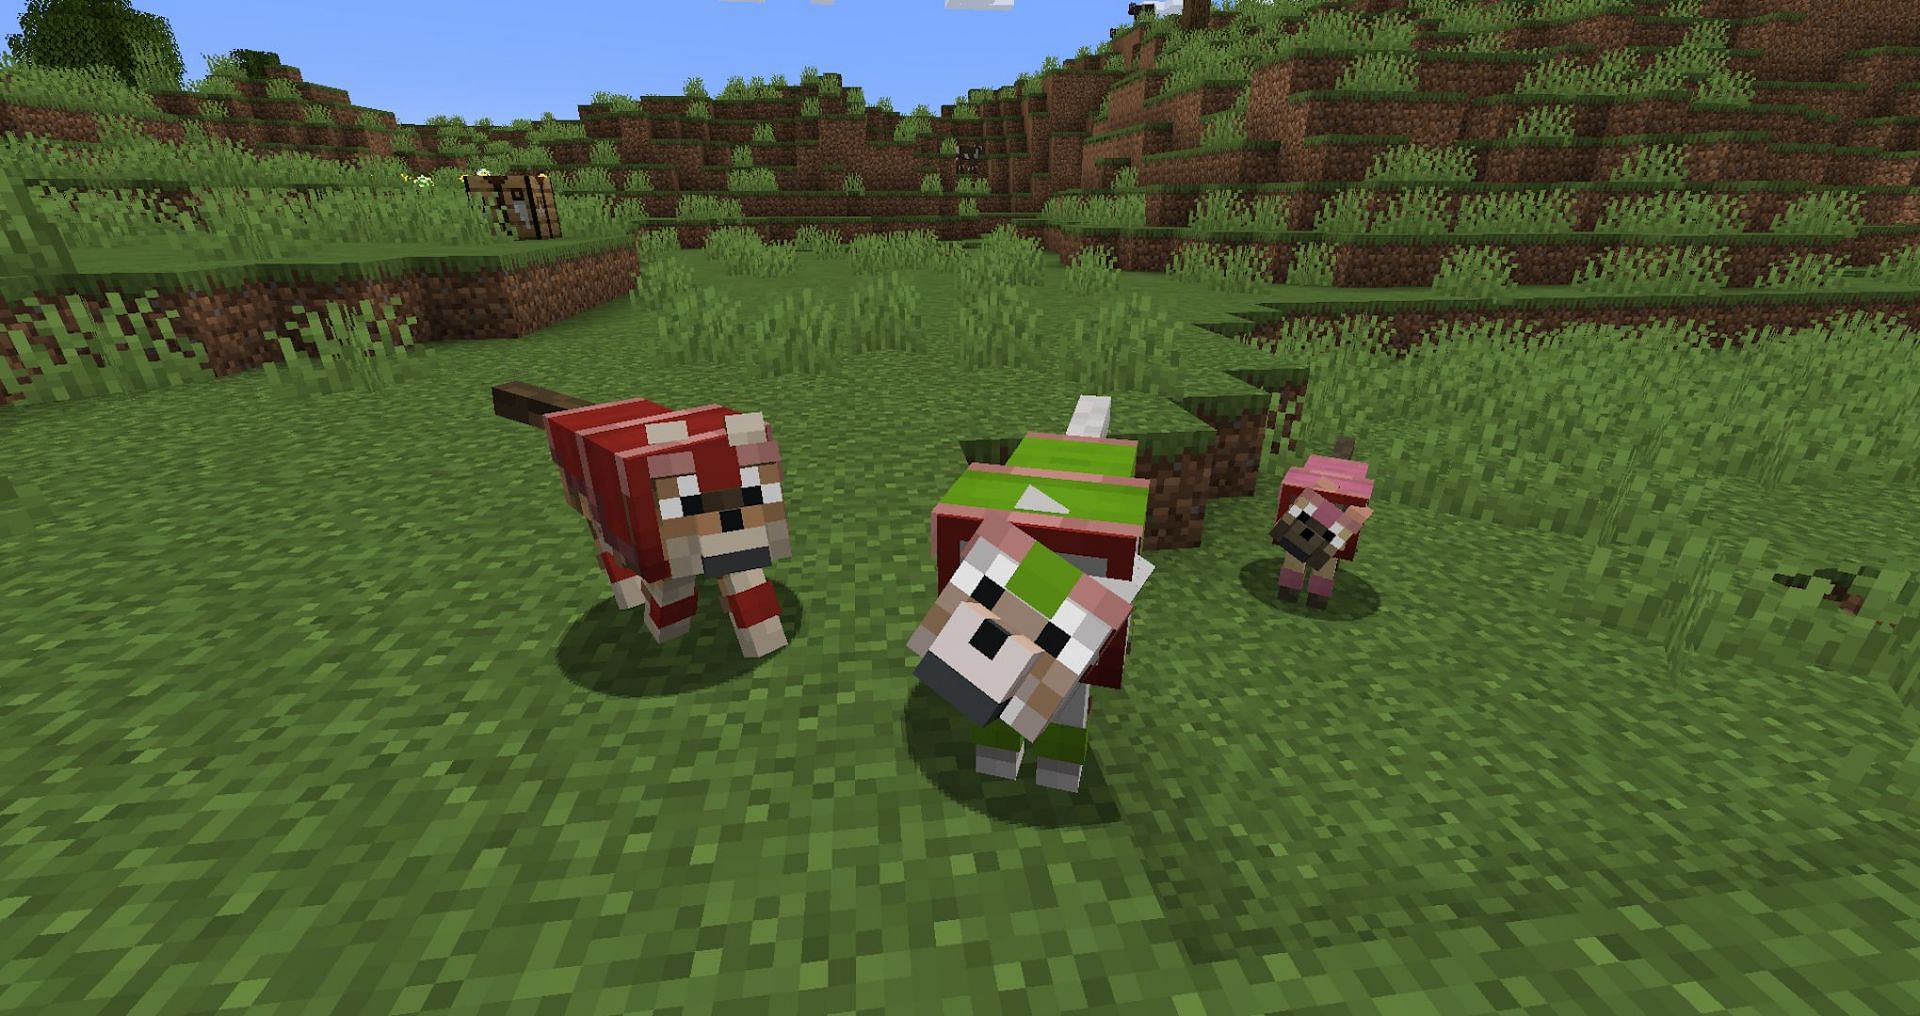 Wolves in newly dyed armor (Image via Mojang Studios)